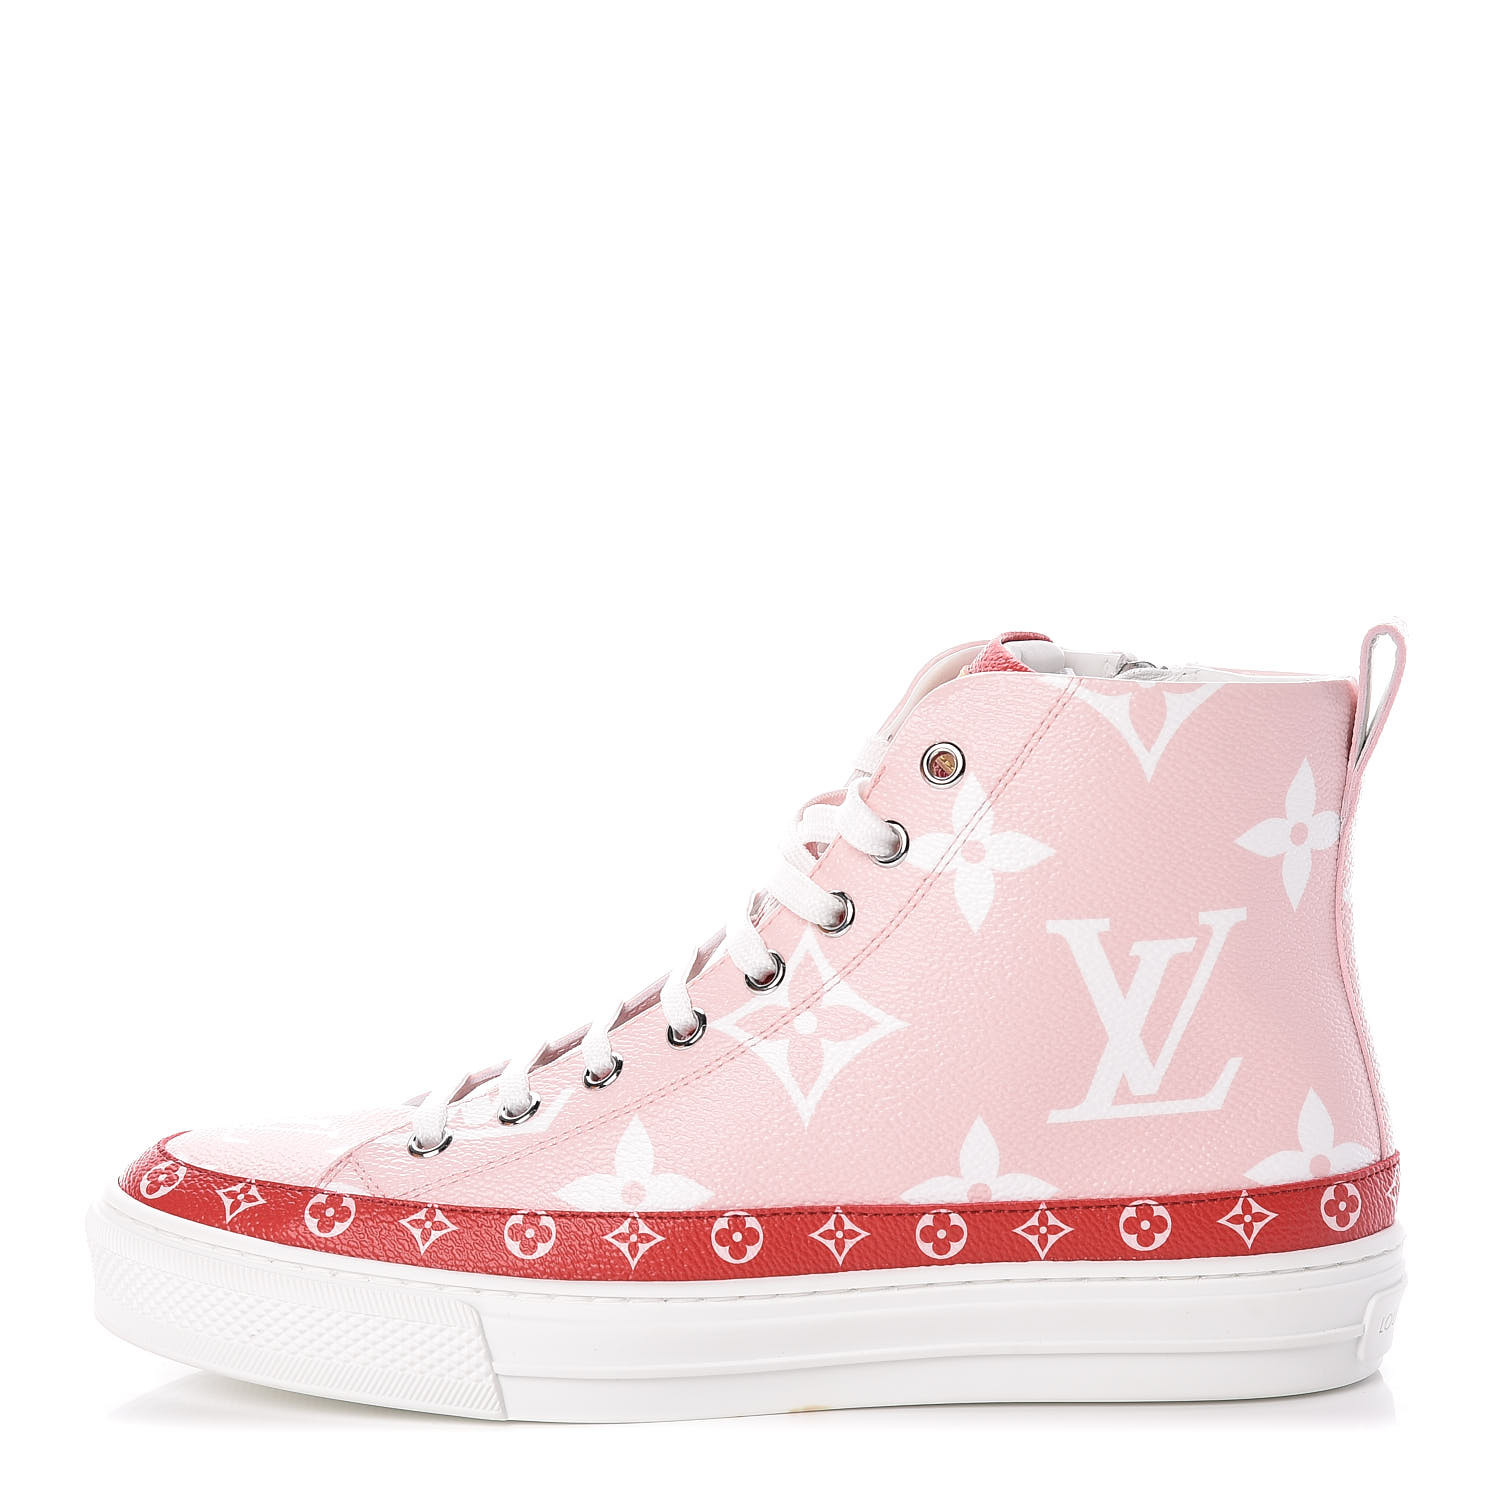 louis vuitton red bottom shoes baby